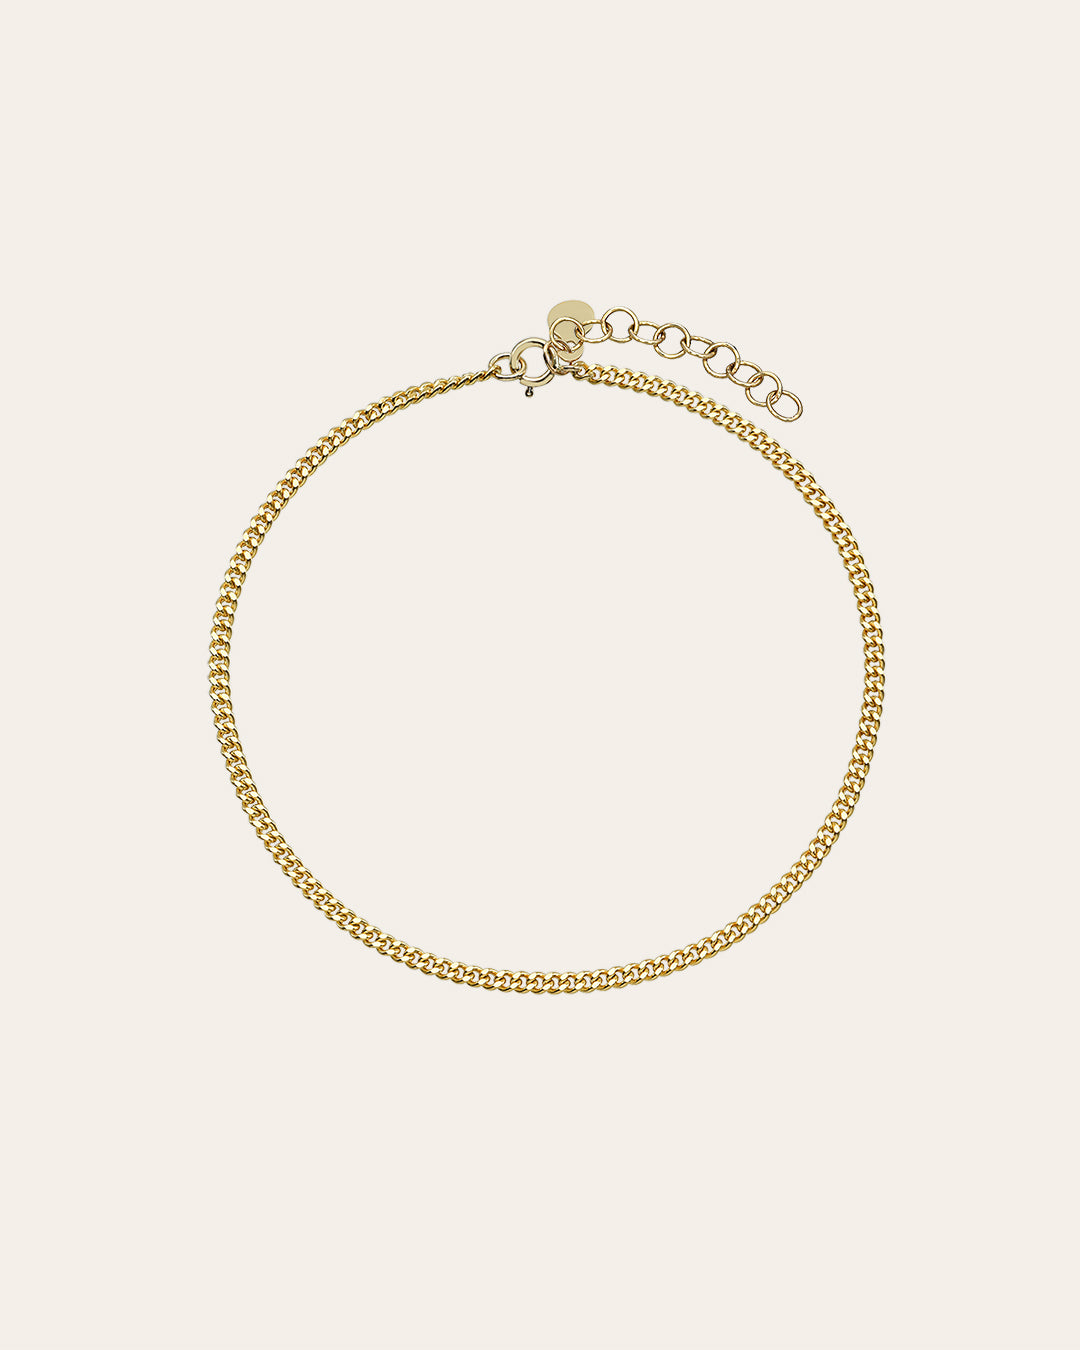 14k Gold Small Curb Link Chain Bracelet